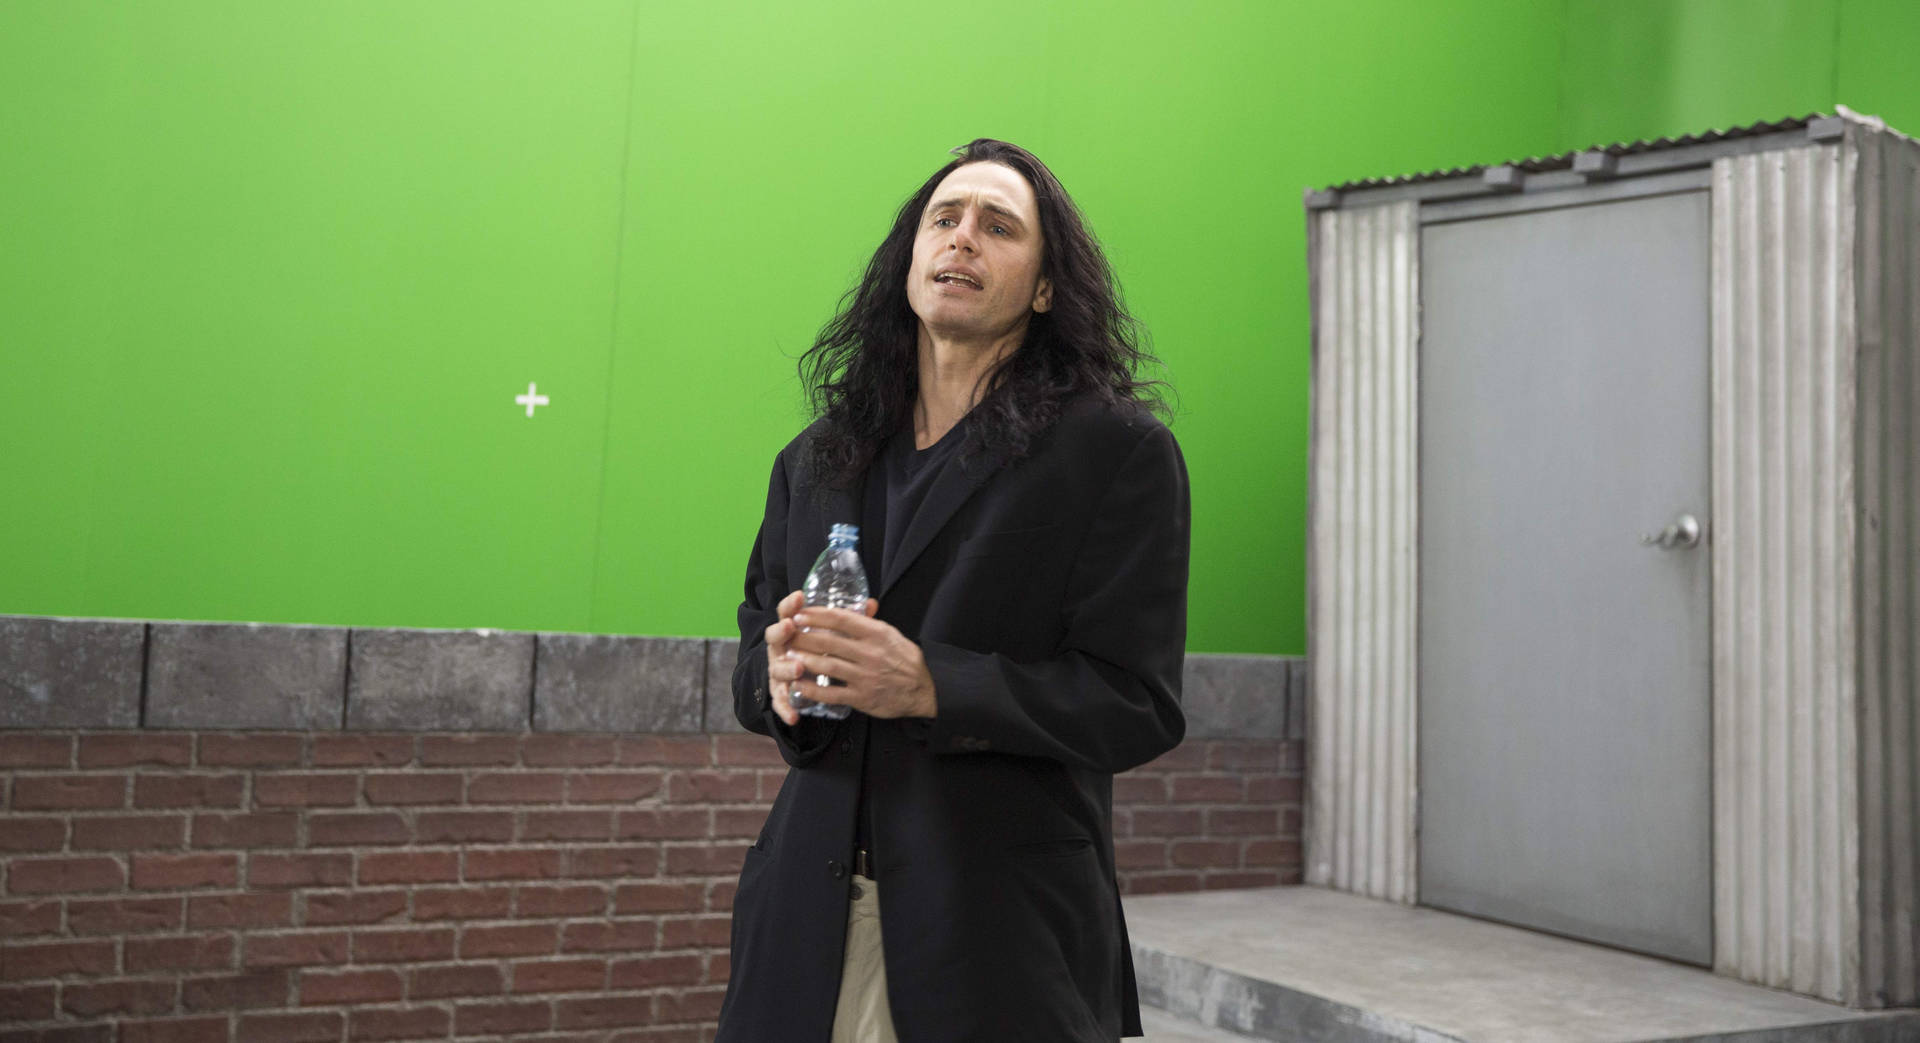 James Franco The Disaster Artist Green Screen Background